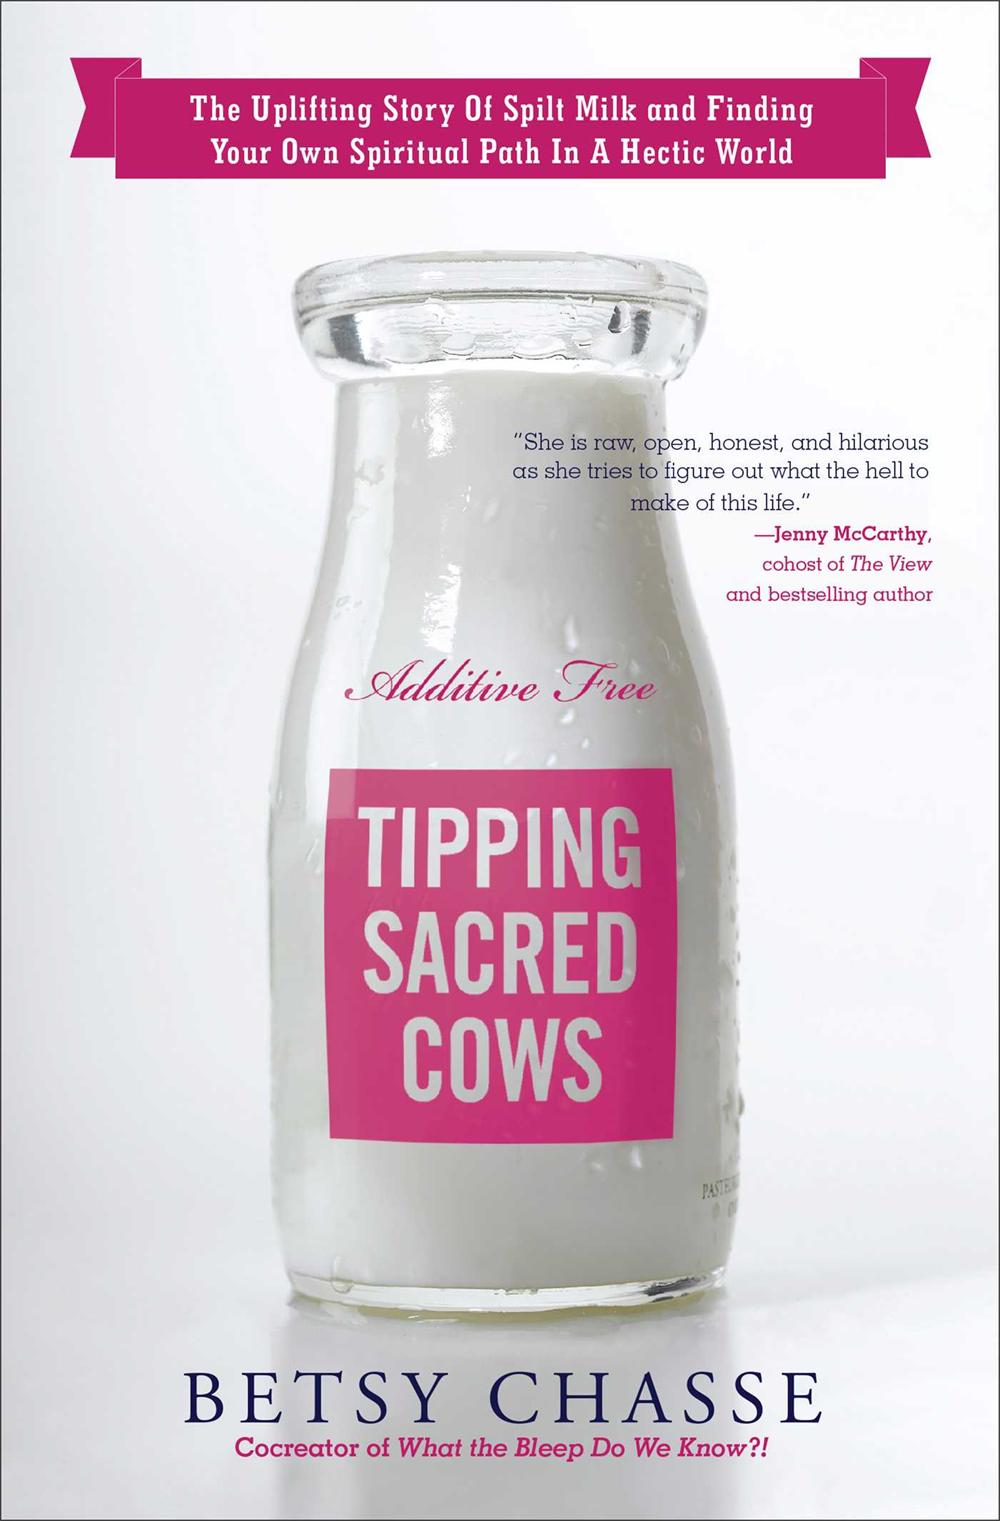 Tipping Sacred Cows: The Uplifting Story of Spilt Milk and Finding Your Own Spiritual Path in a Hectic World